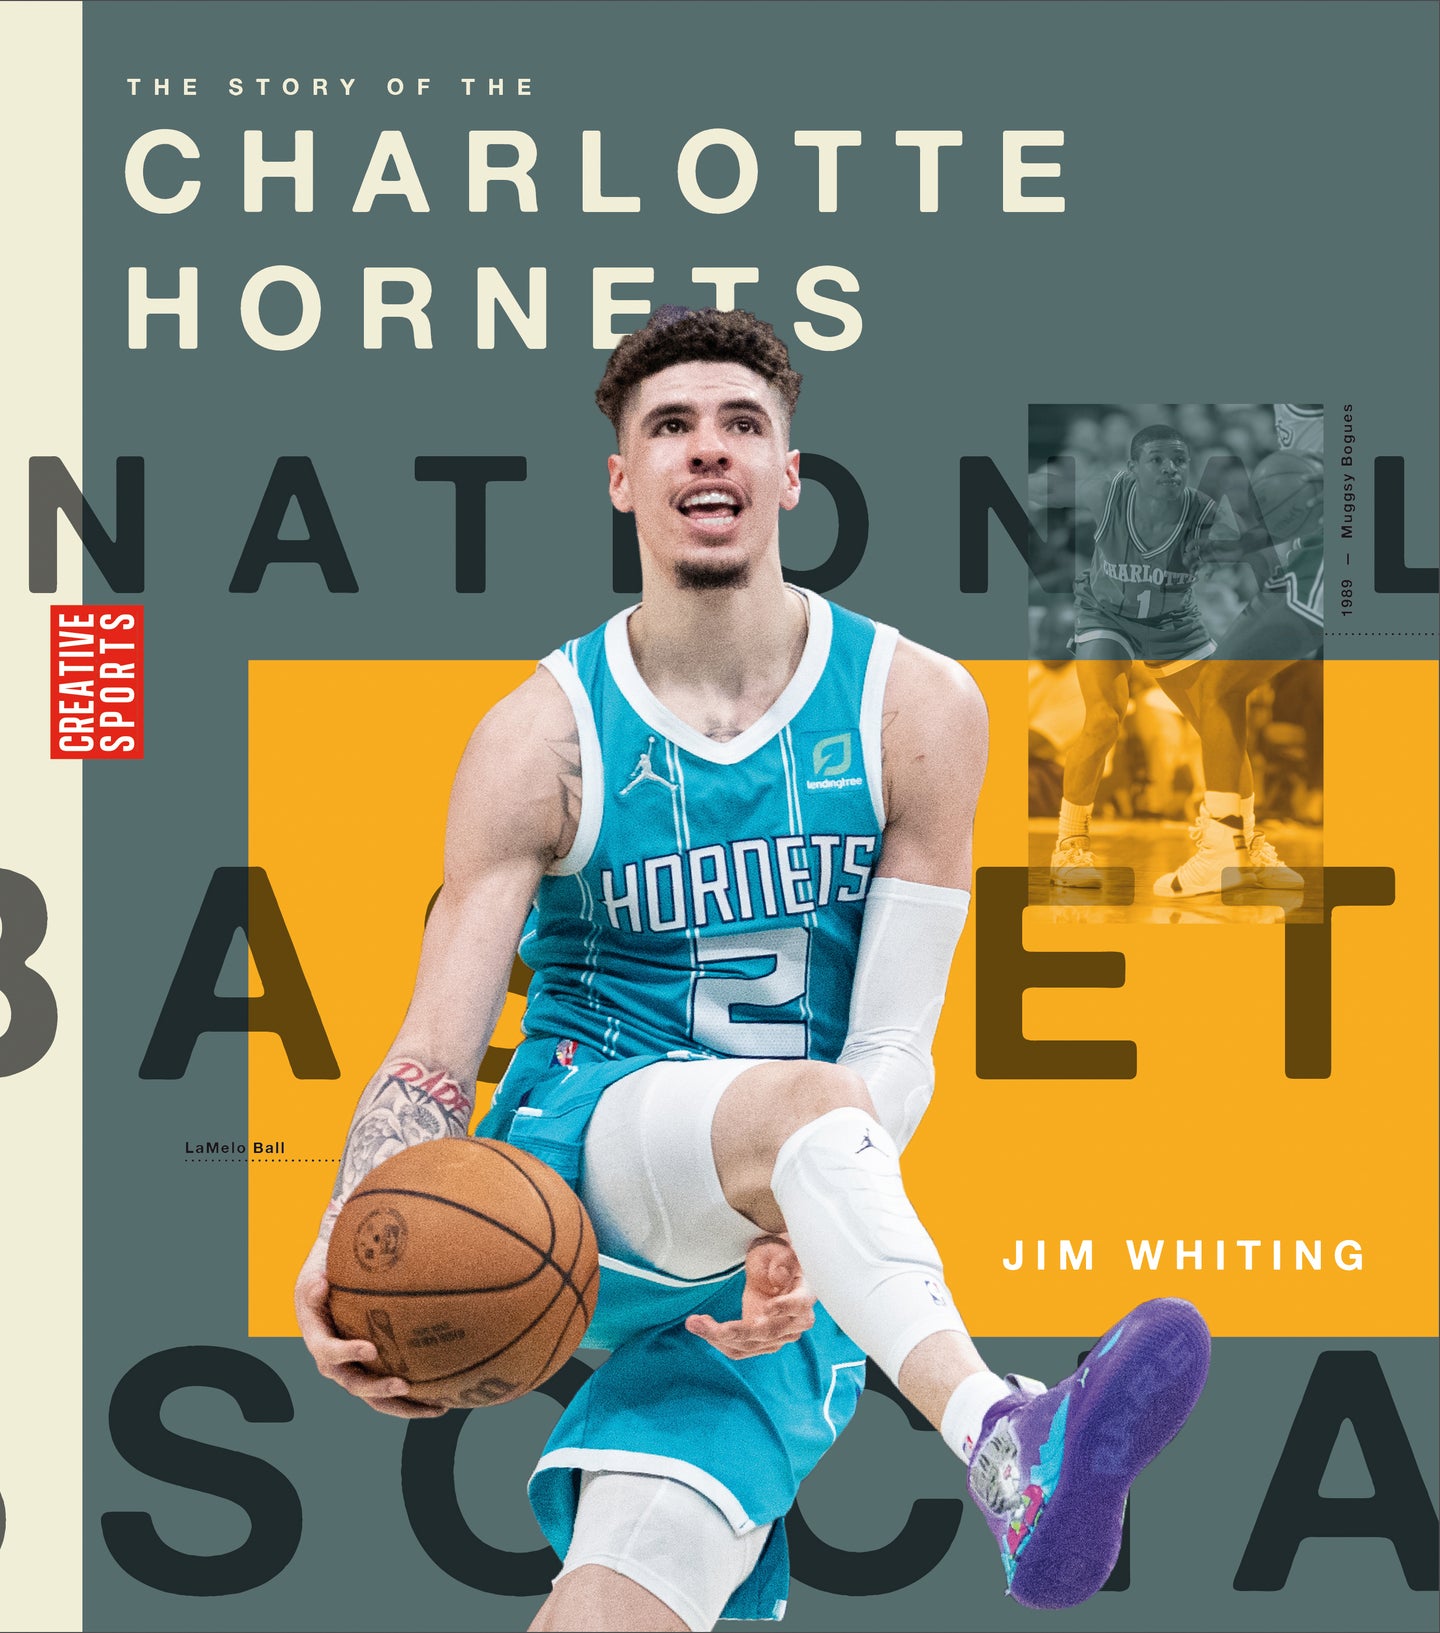 A History of Hoops (2023): The Story of the Charlotte Hornets